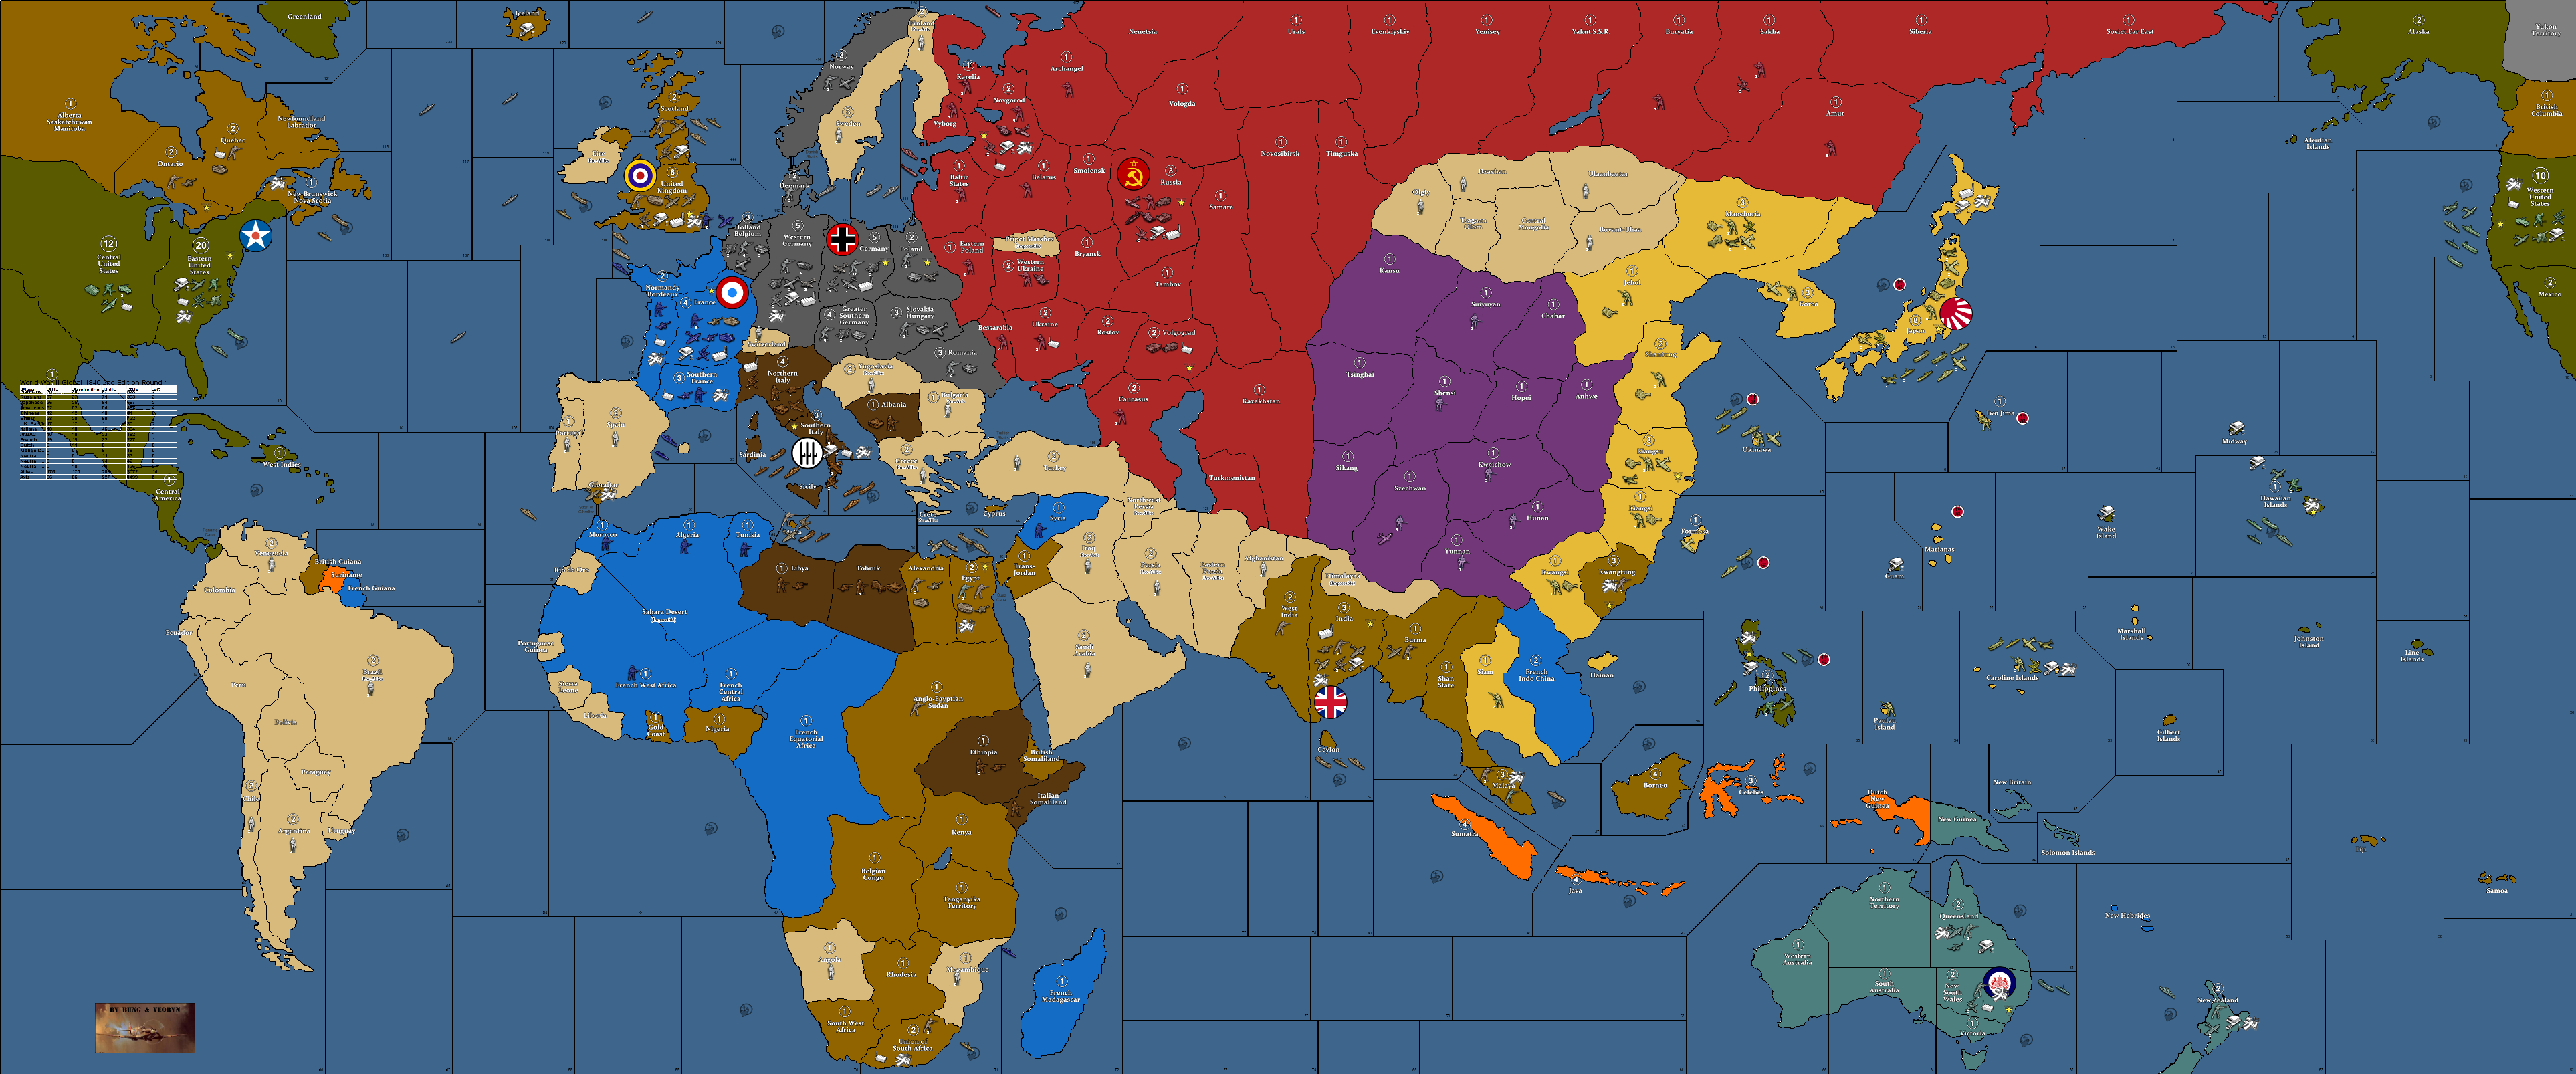 axis and allies global strategy